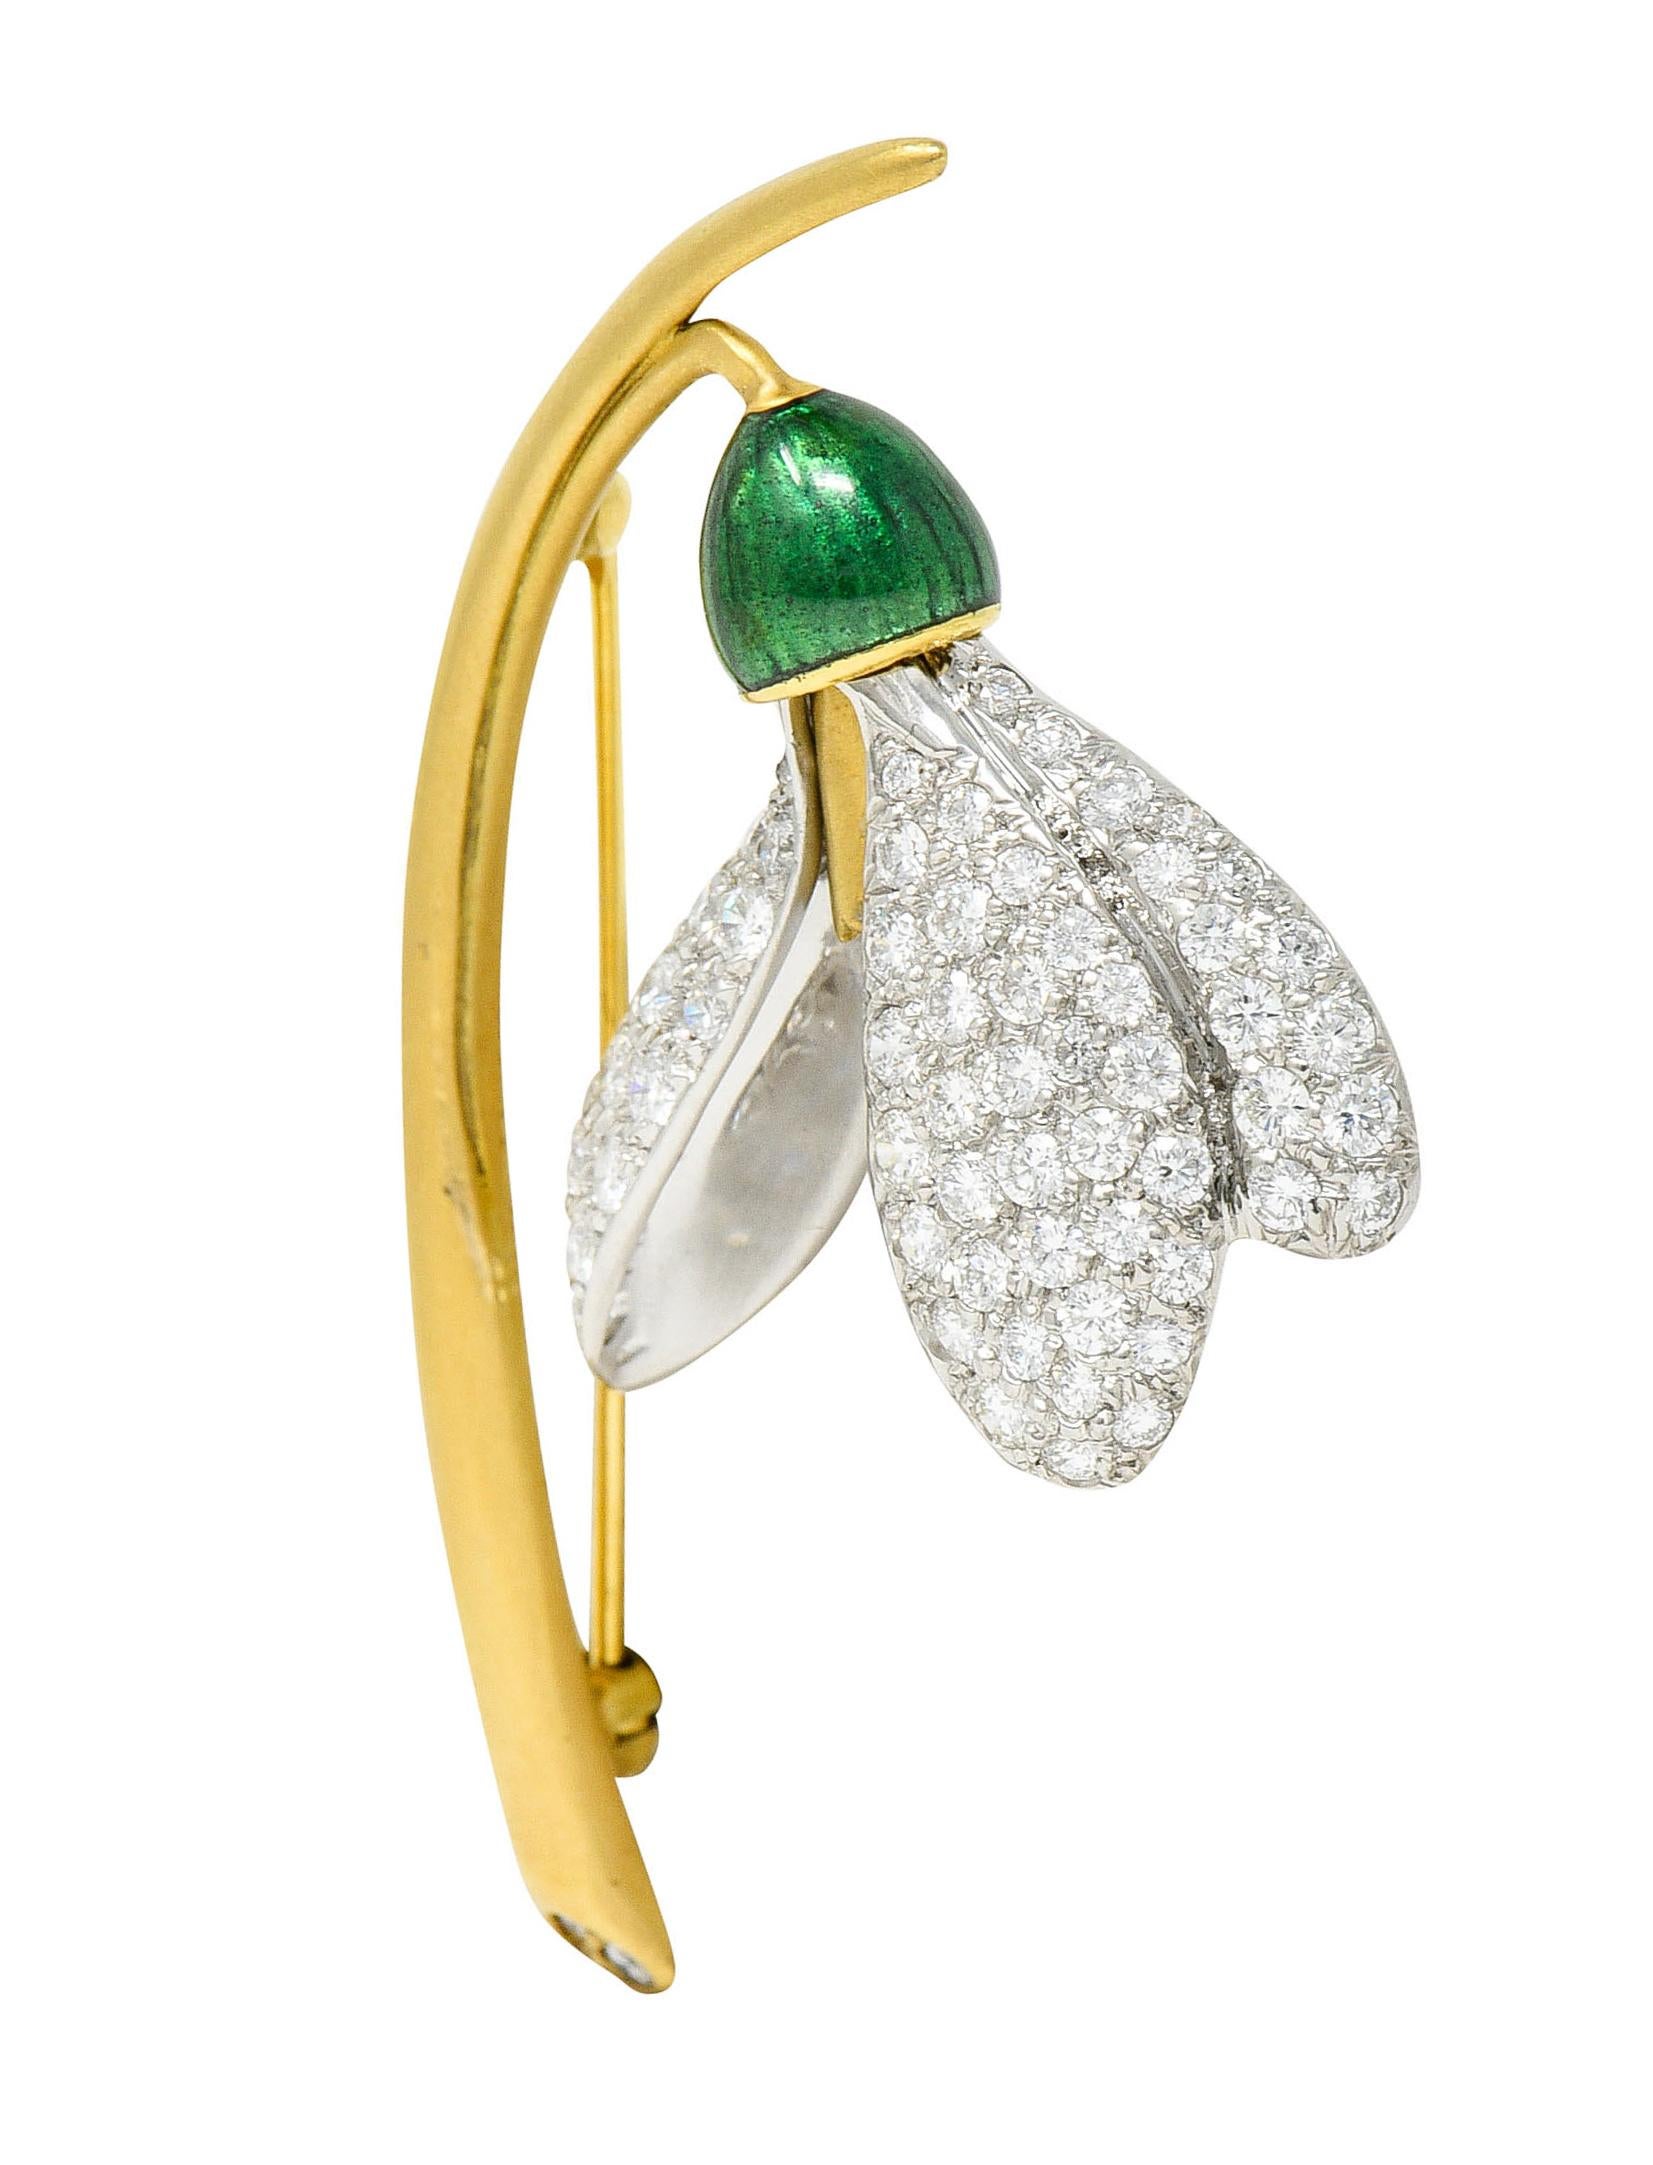 Floral bar brooch is designed as a stylized snowdrop flower

With a matte gold stem and bell-like internal petals

White gold petals are dimensional and are pavè set with round brilliant cut diamonds

Weighing in total approximately 1.75 carats with